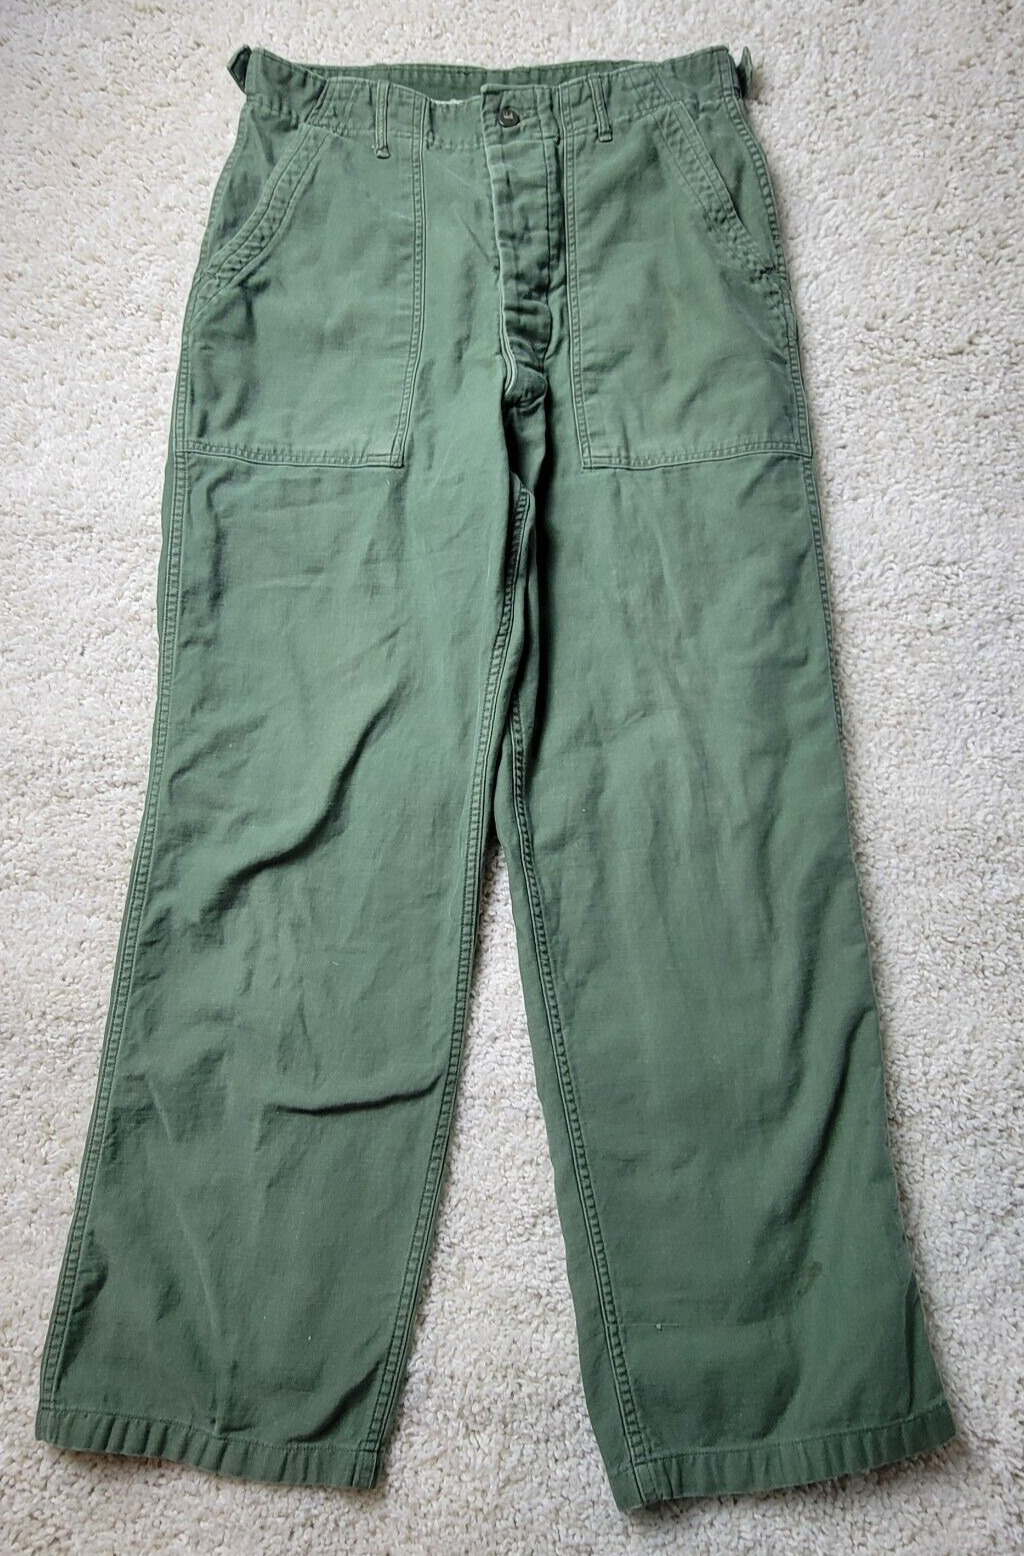 Vintage Army Fatigue Pants Medium Distressed Type I Sateen OG-107 Trousers